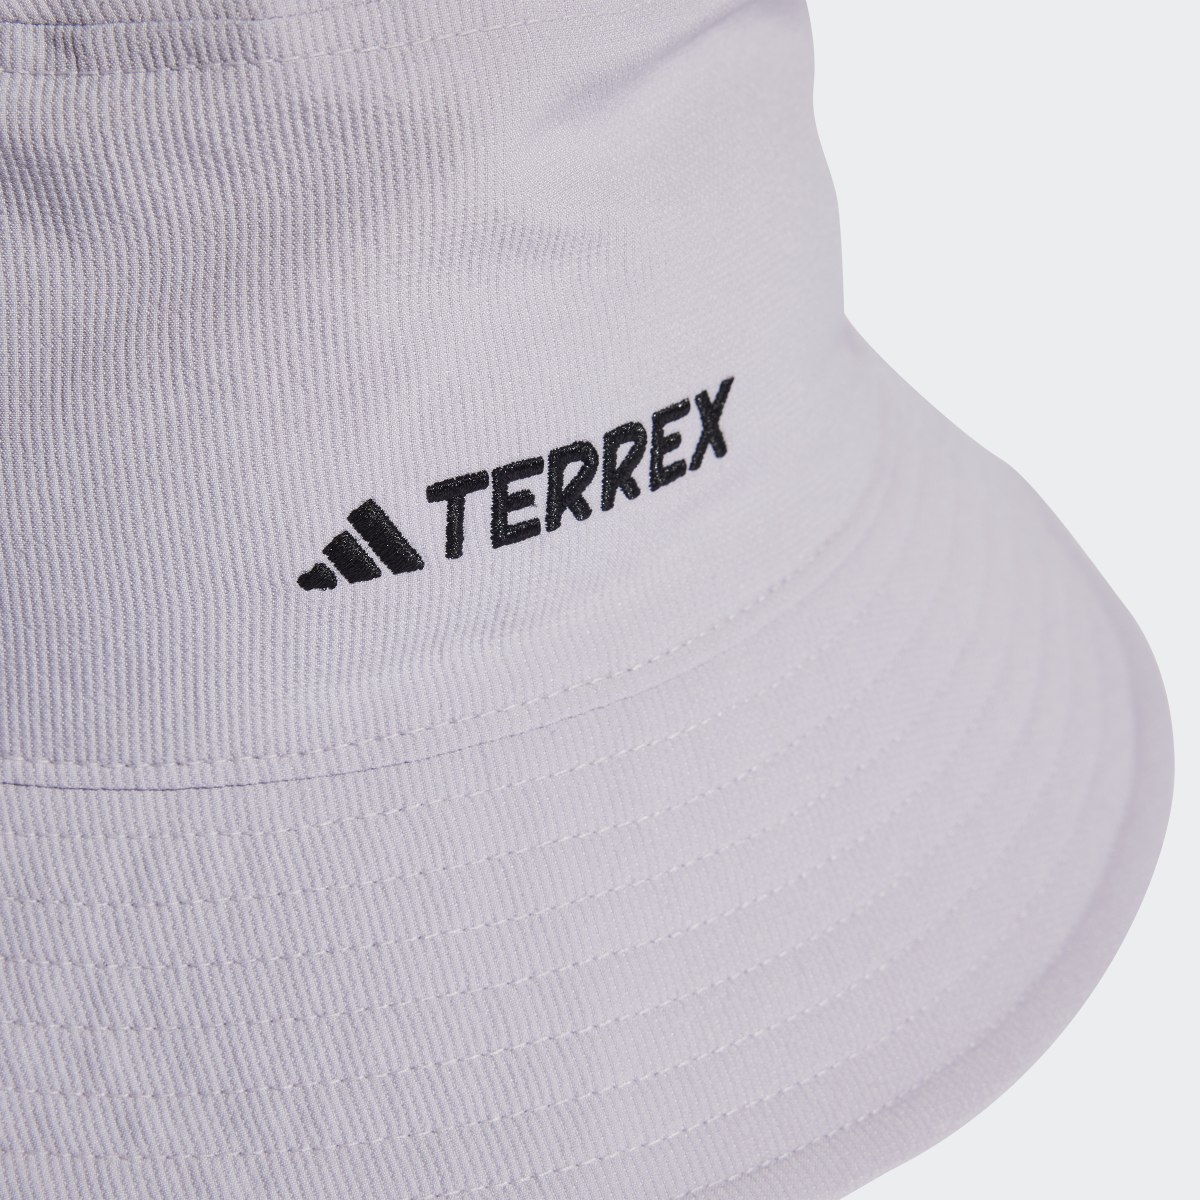 Adidas Terrex HEAT.RDY Made To Be Remade Bucket Hat. 5